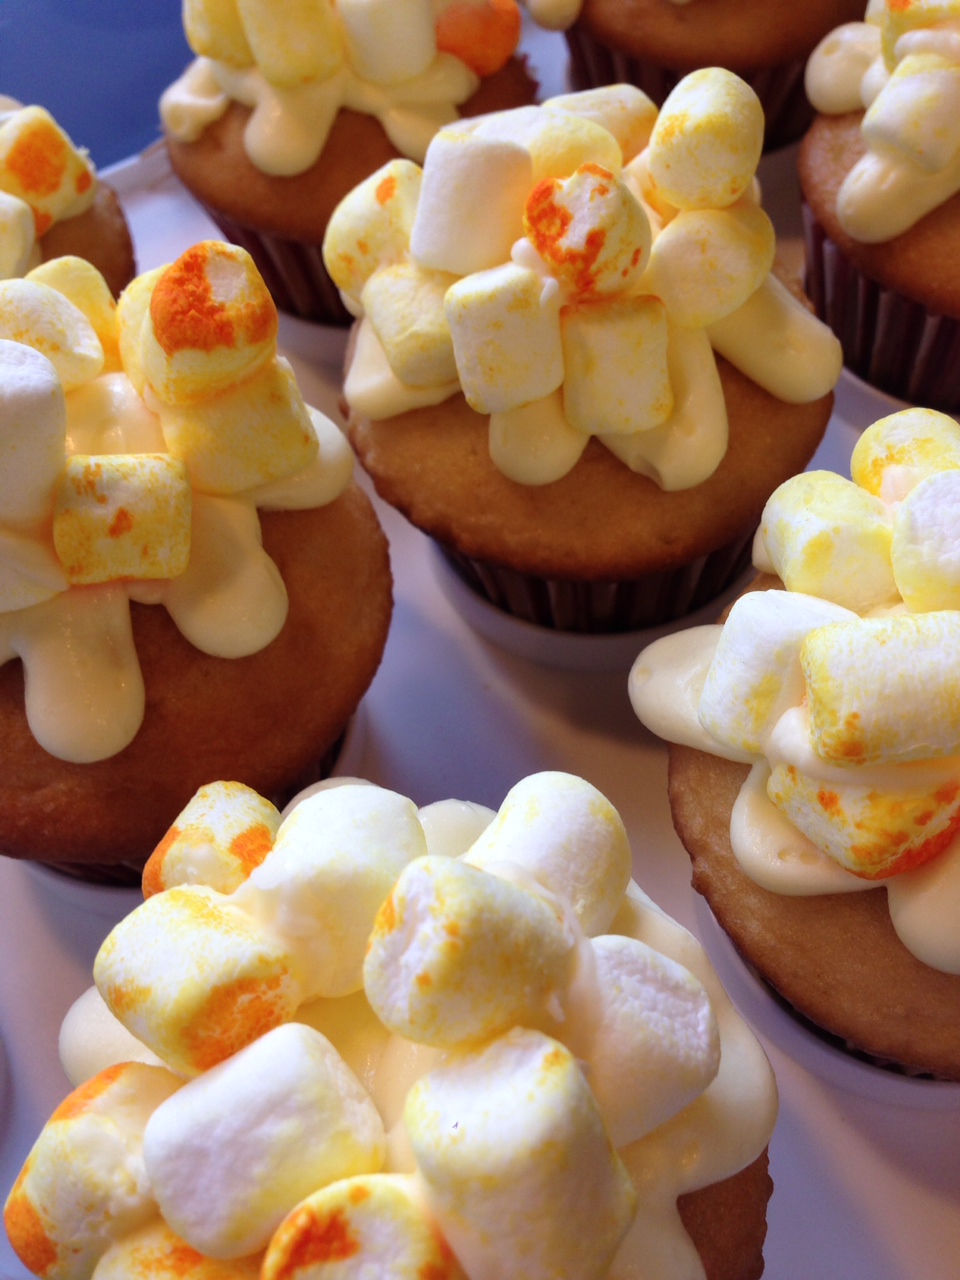 The finished 'popcorn cupcakes' are completely adorable.